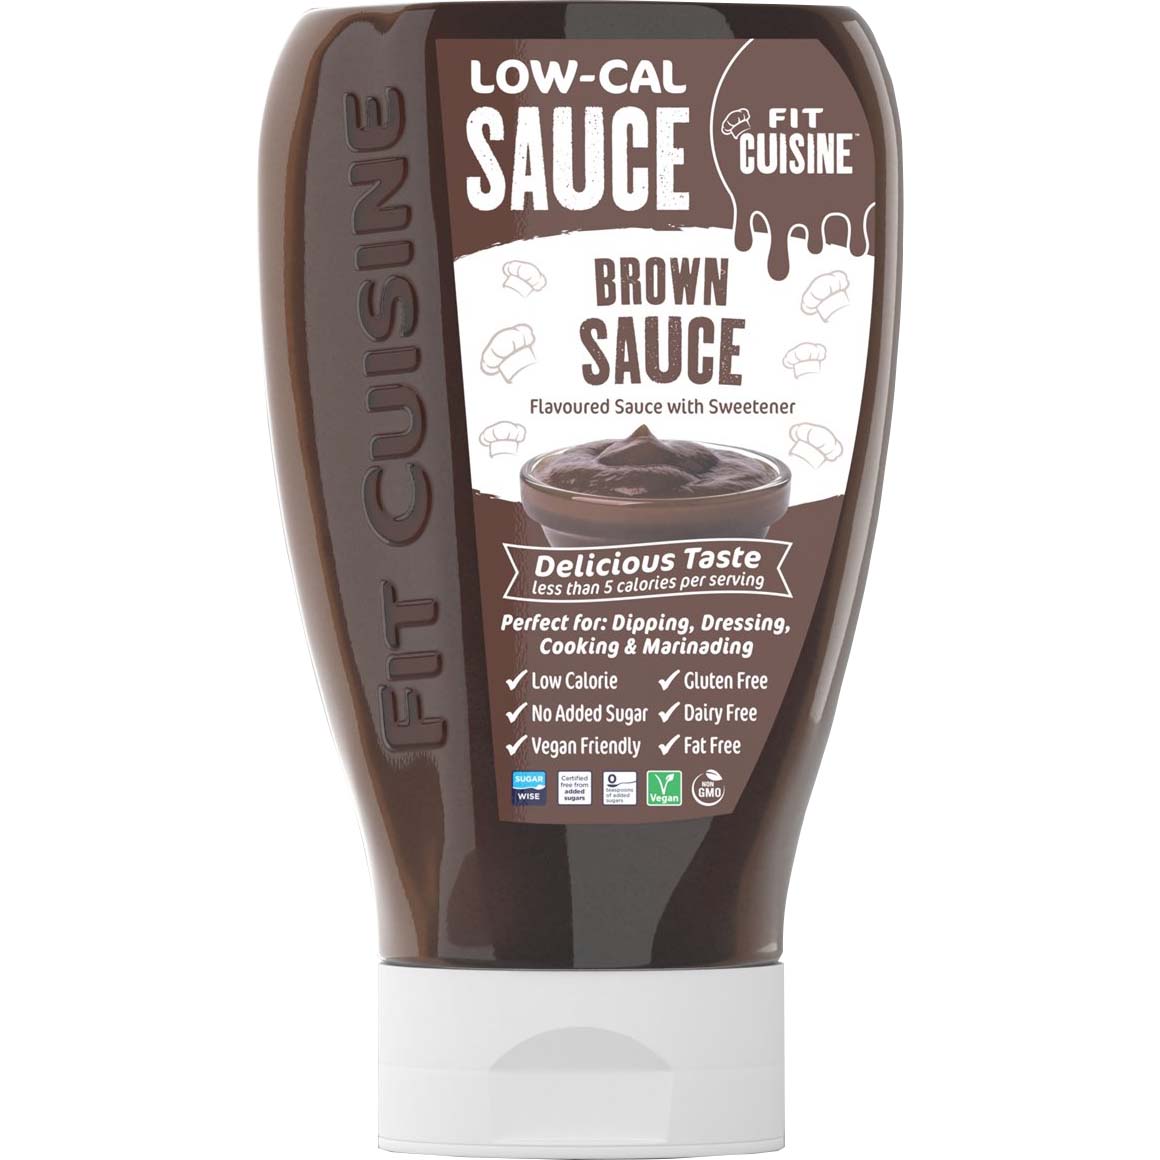 Applied Nutrition Low-cal Sauce Brown